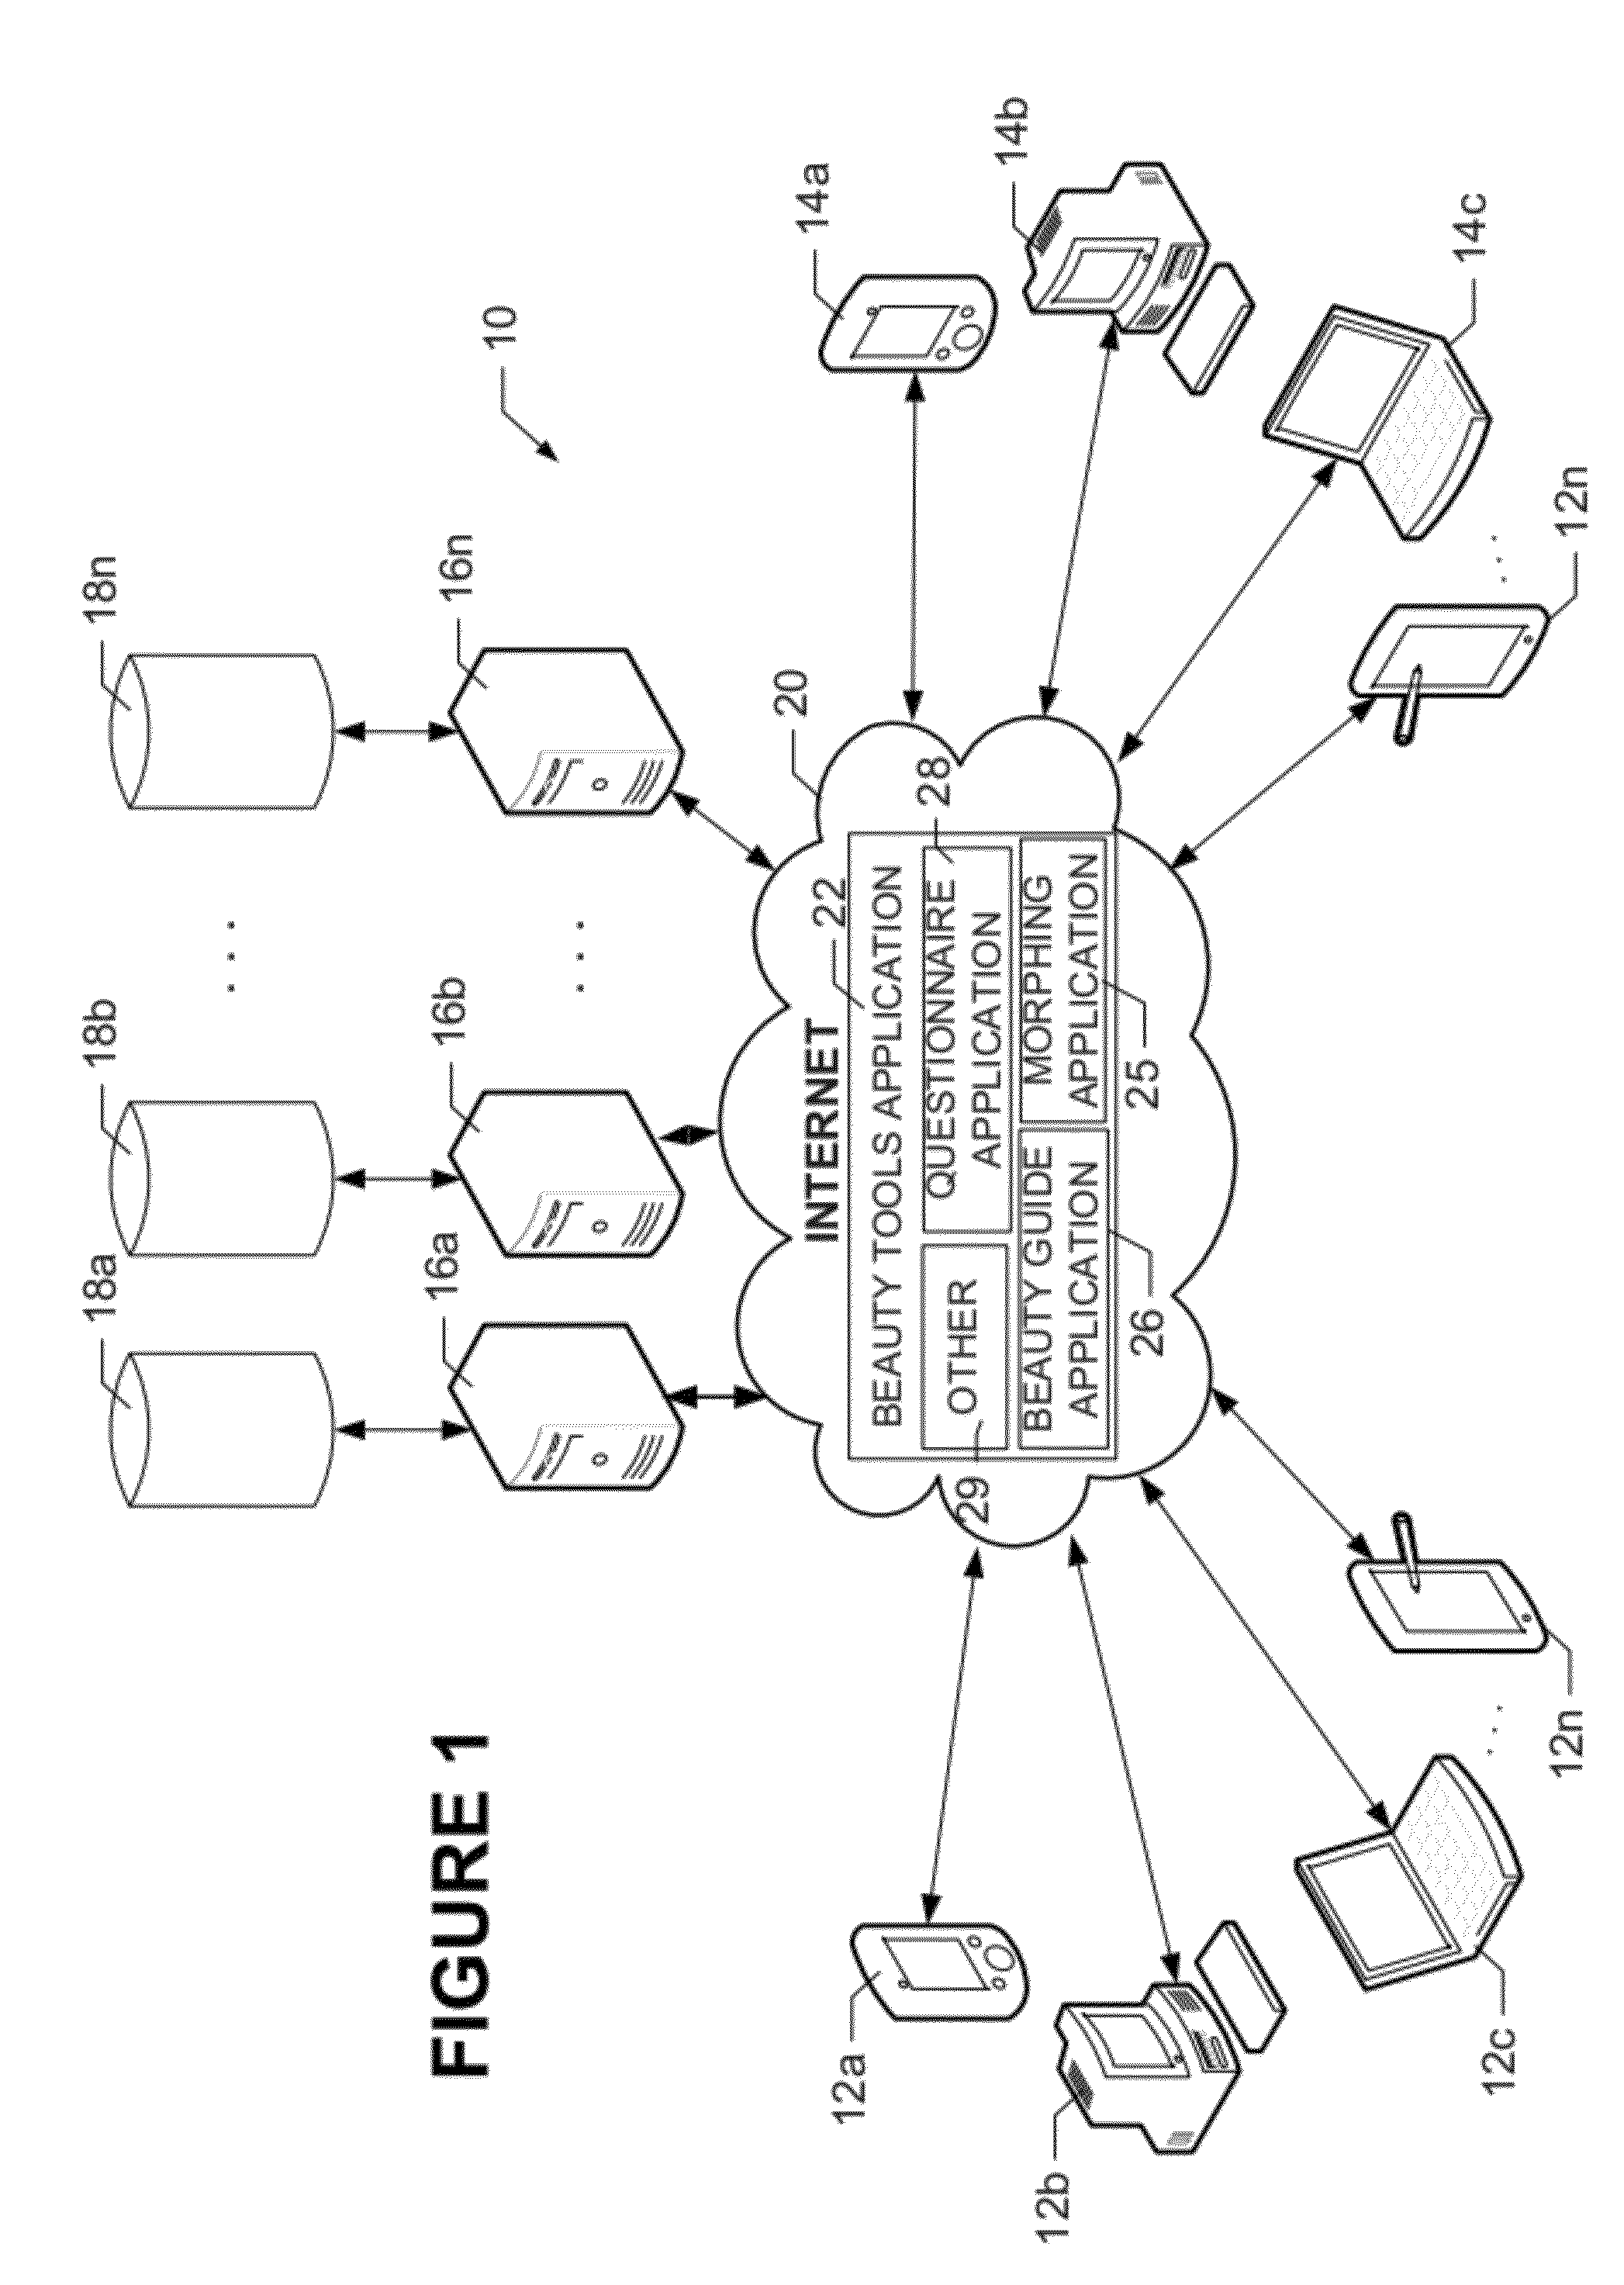 Computer implemented system and method for connecting patients with practitioners